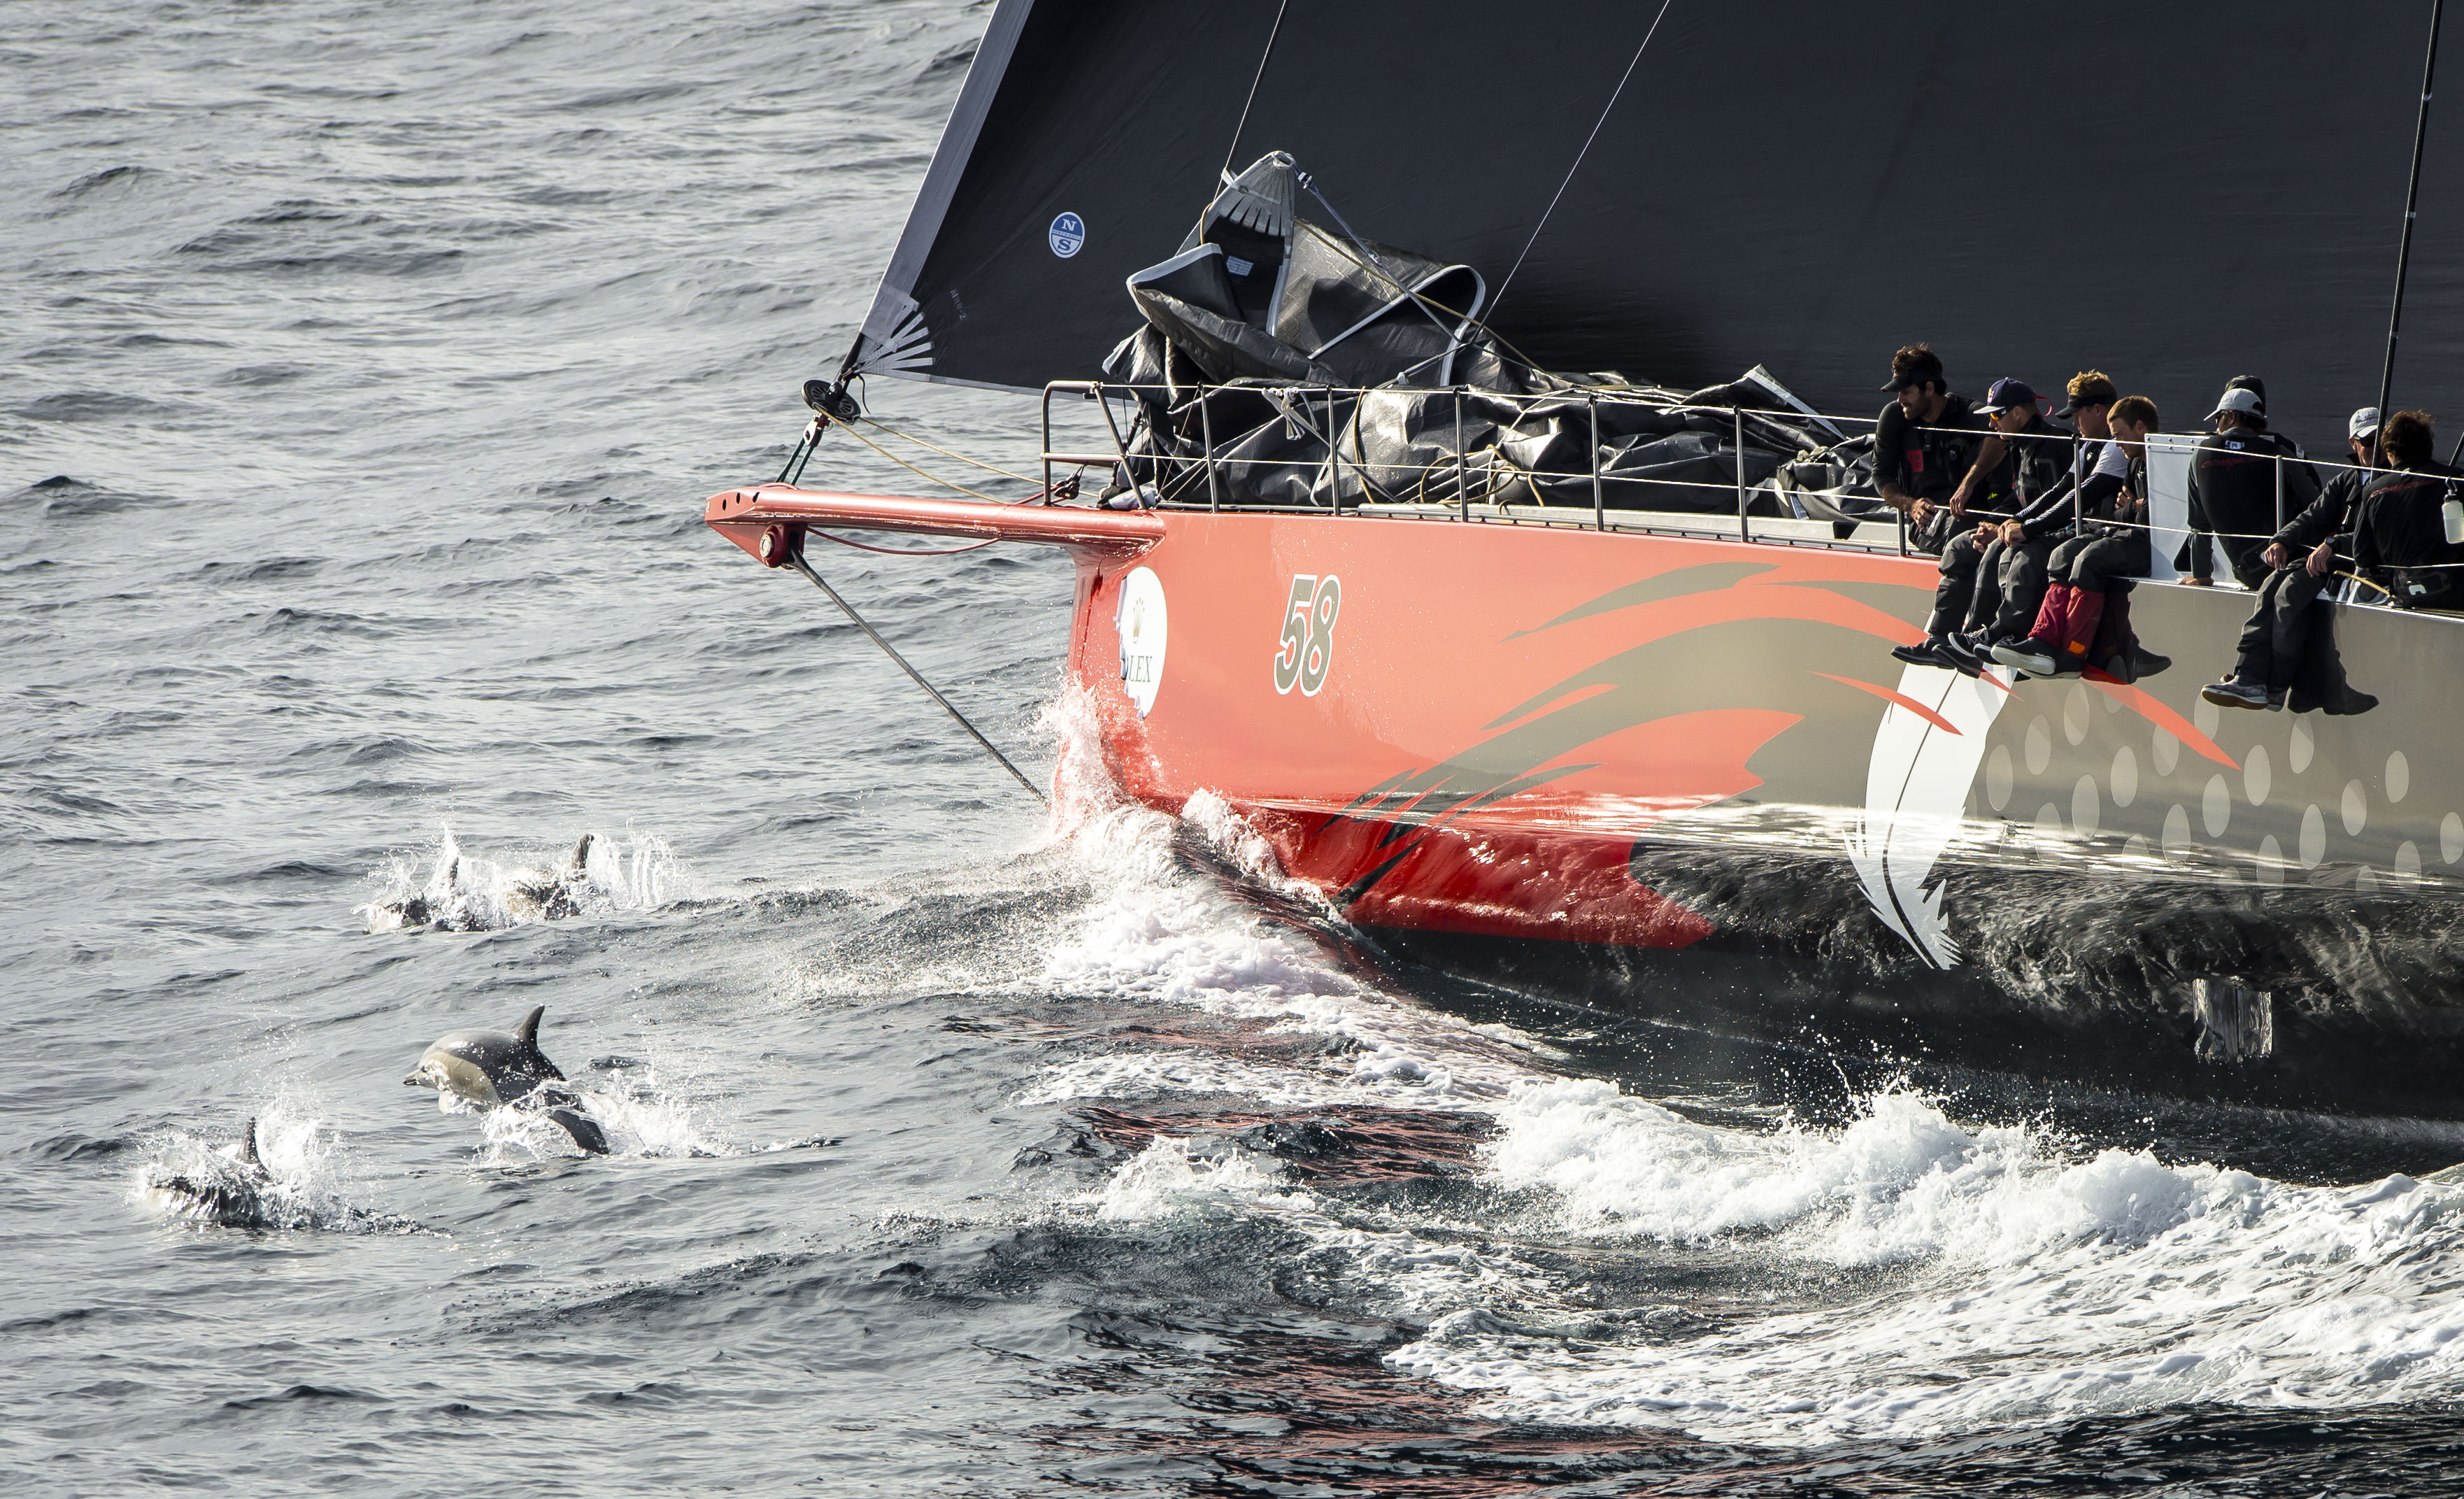  IRC  SydneyHobart Race  Sydney AUS  Day 3, Line honors for 'Comanche' USA